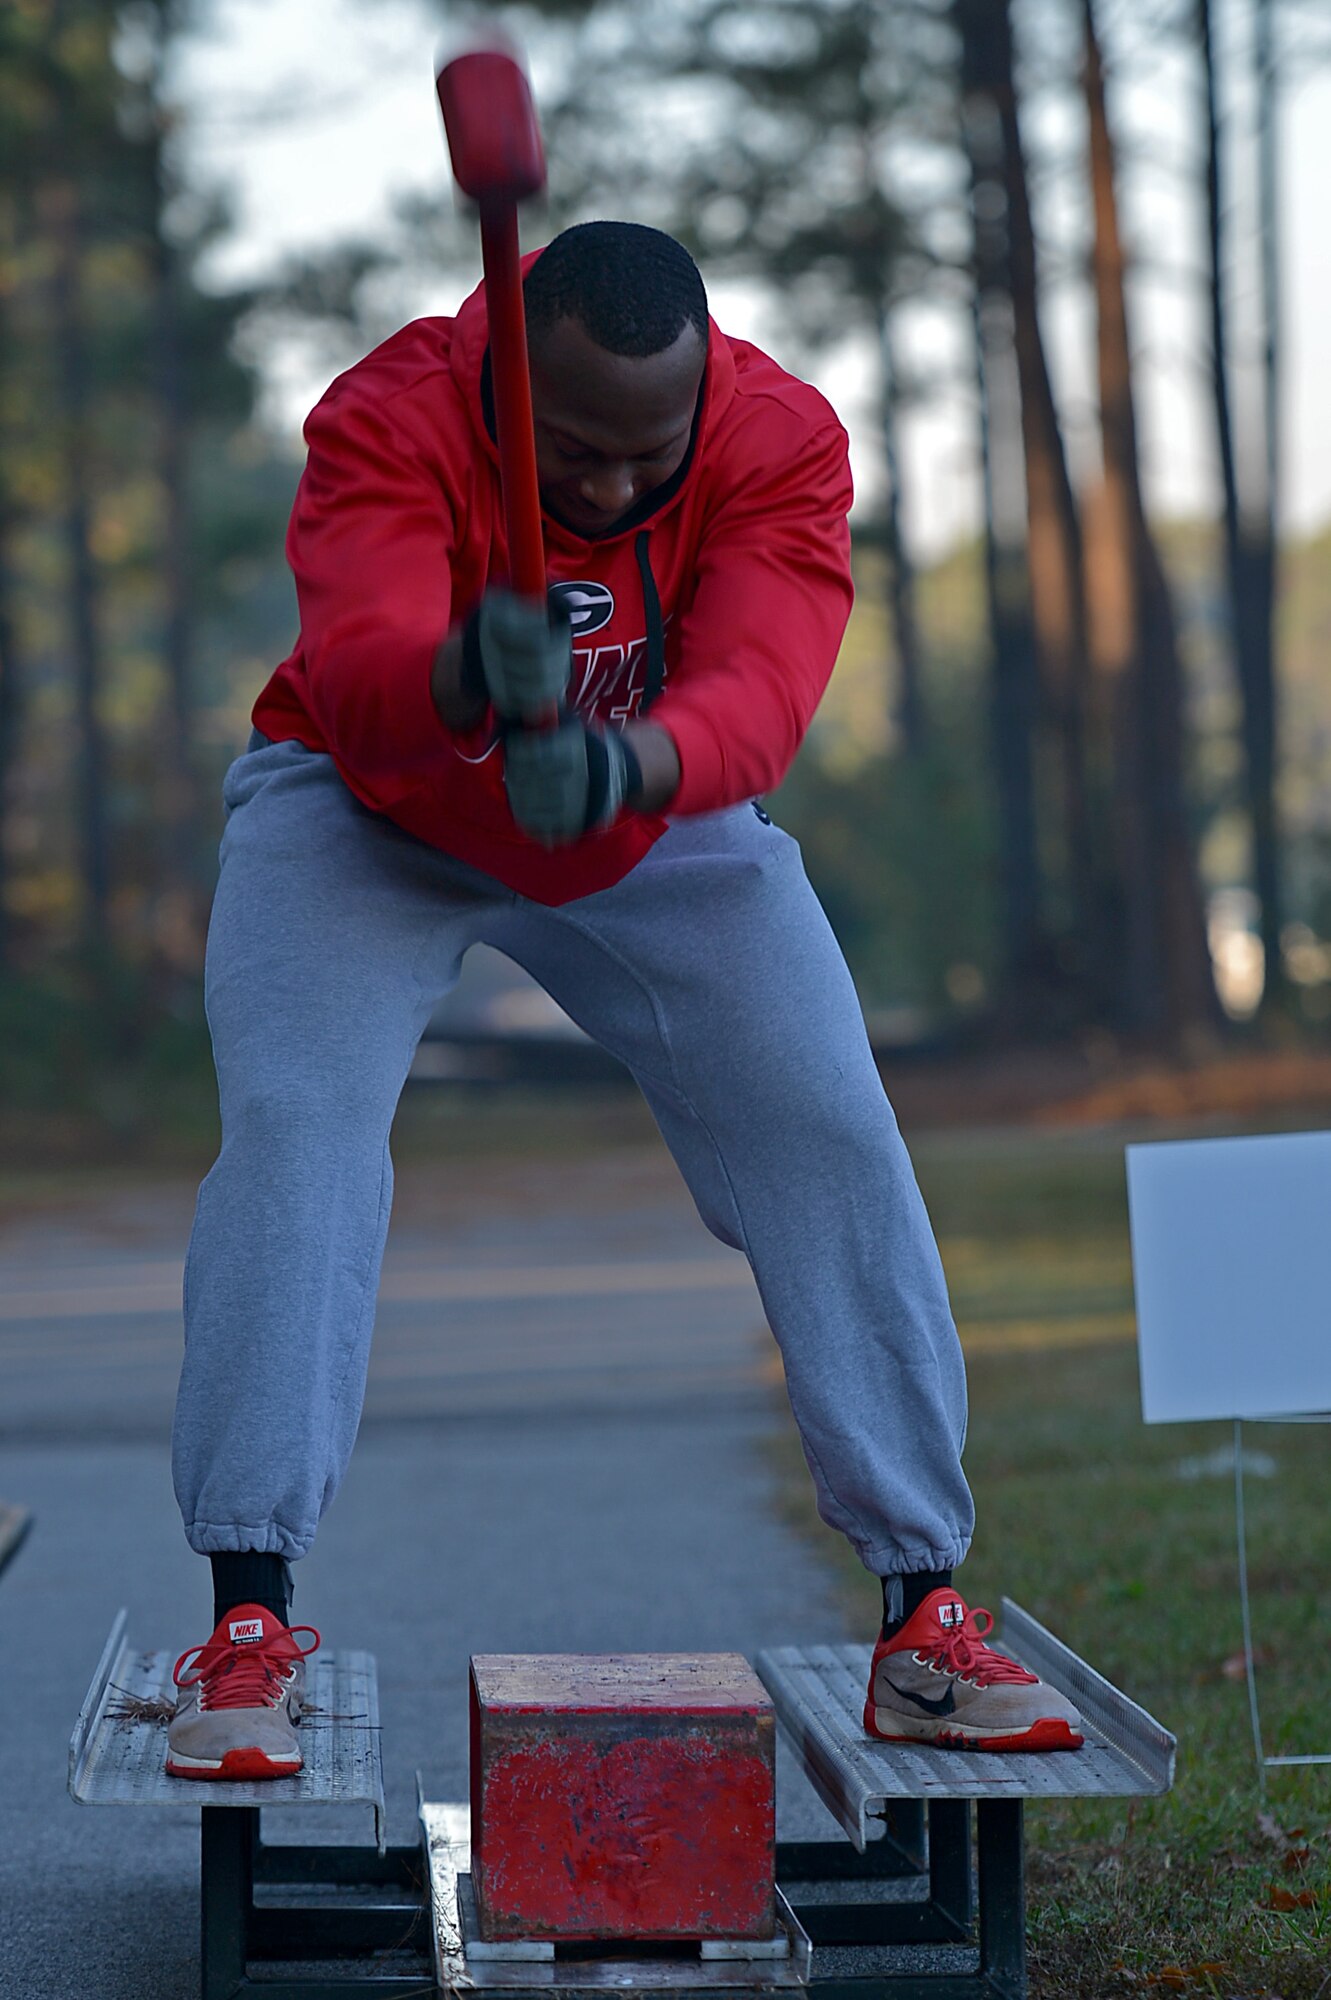 A U.S. Airman assigned to the 20th Fighter Wing hits a block with a hammer during a Firefighter Combat Challenge 5K Run at Shaw Air Force Base, S.C., Nov. 18, 2016. Airmen from various squadrons worked together in teams to complete obstacles created to test their physical endurance as well as build camaraderie following the conclusion of operational readiness exercise Weasel Victory 17-03. (U.S. Air Force photo by Airman 1st Class Christopher Maldonado)